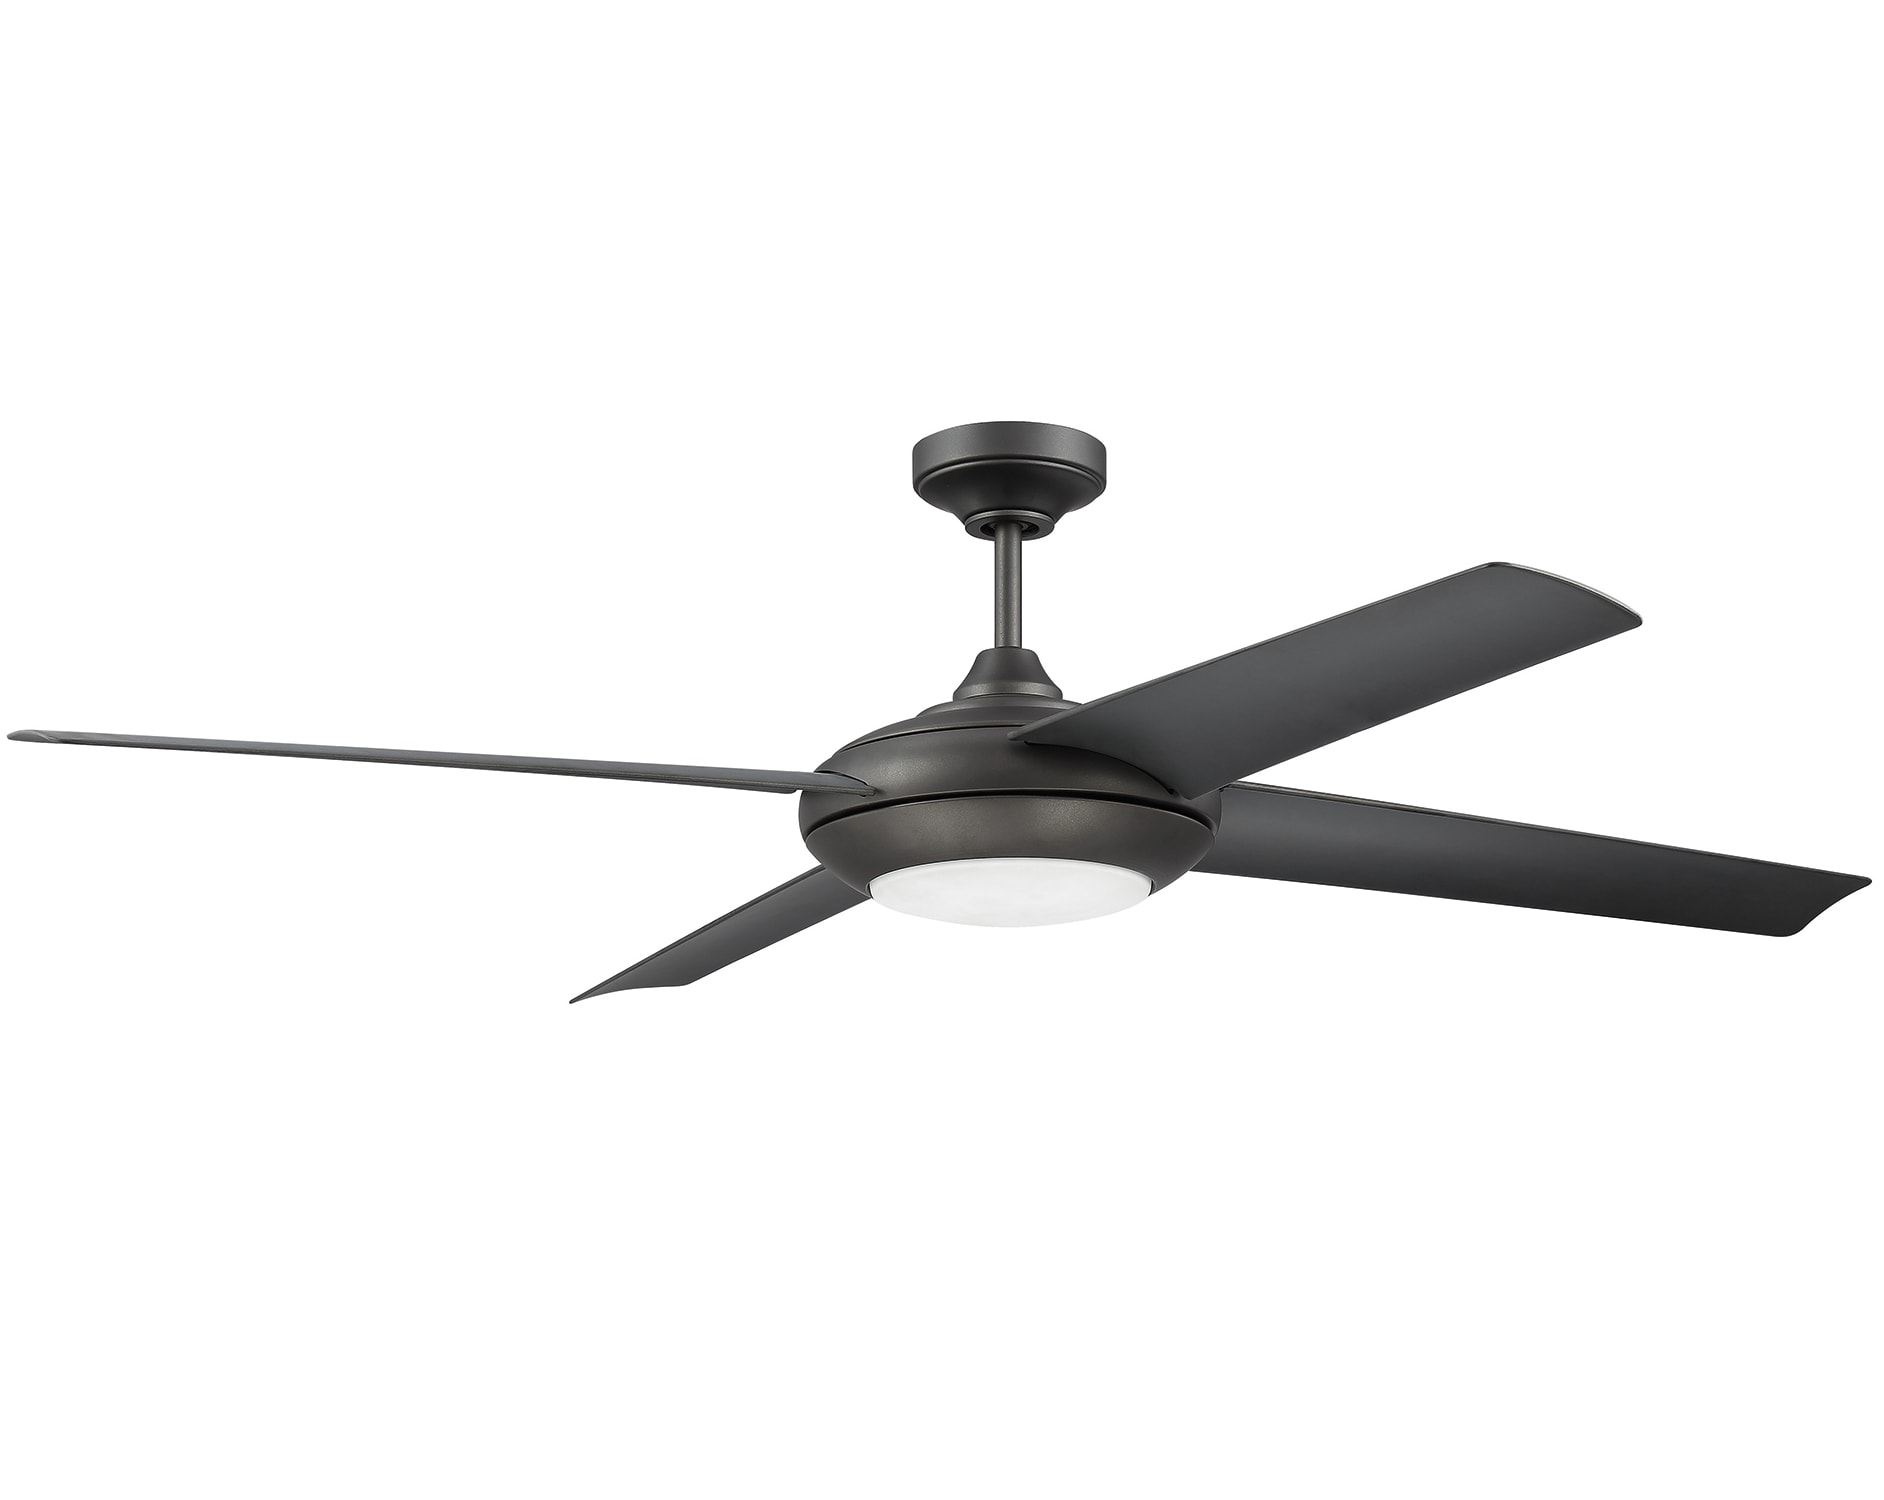 Blade Ceiling Fan Blades, 4 Blade Ceiling Fans With Led Light And Remote Control